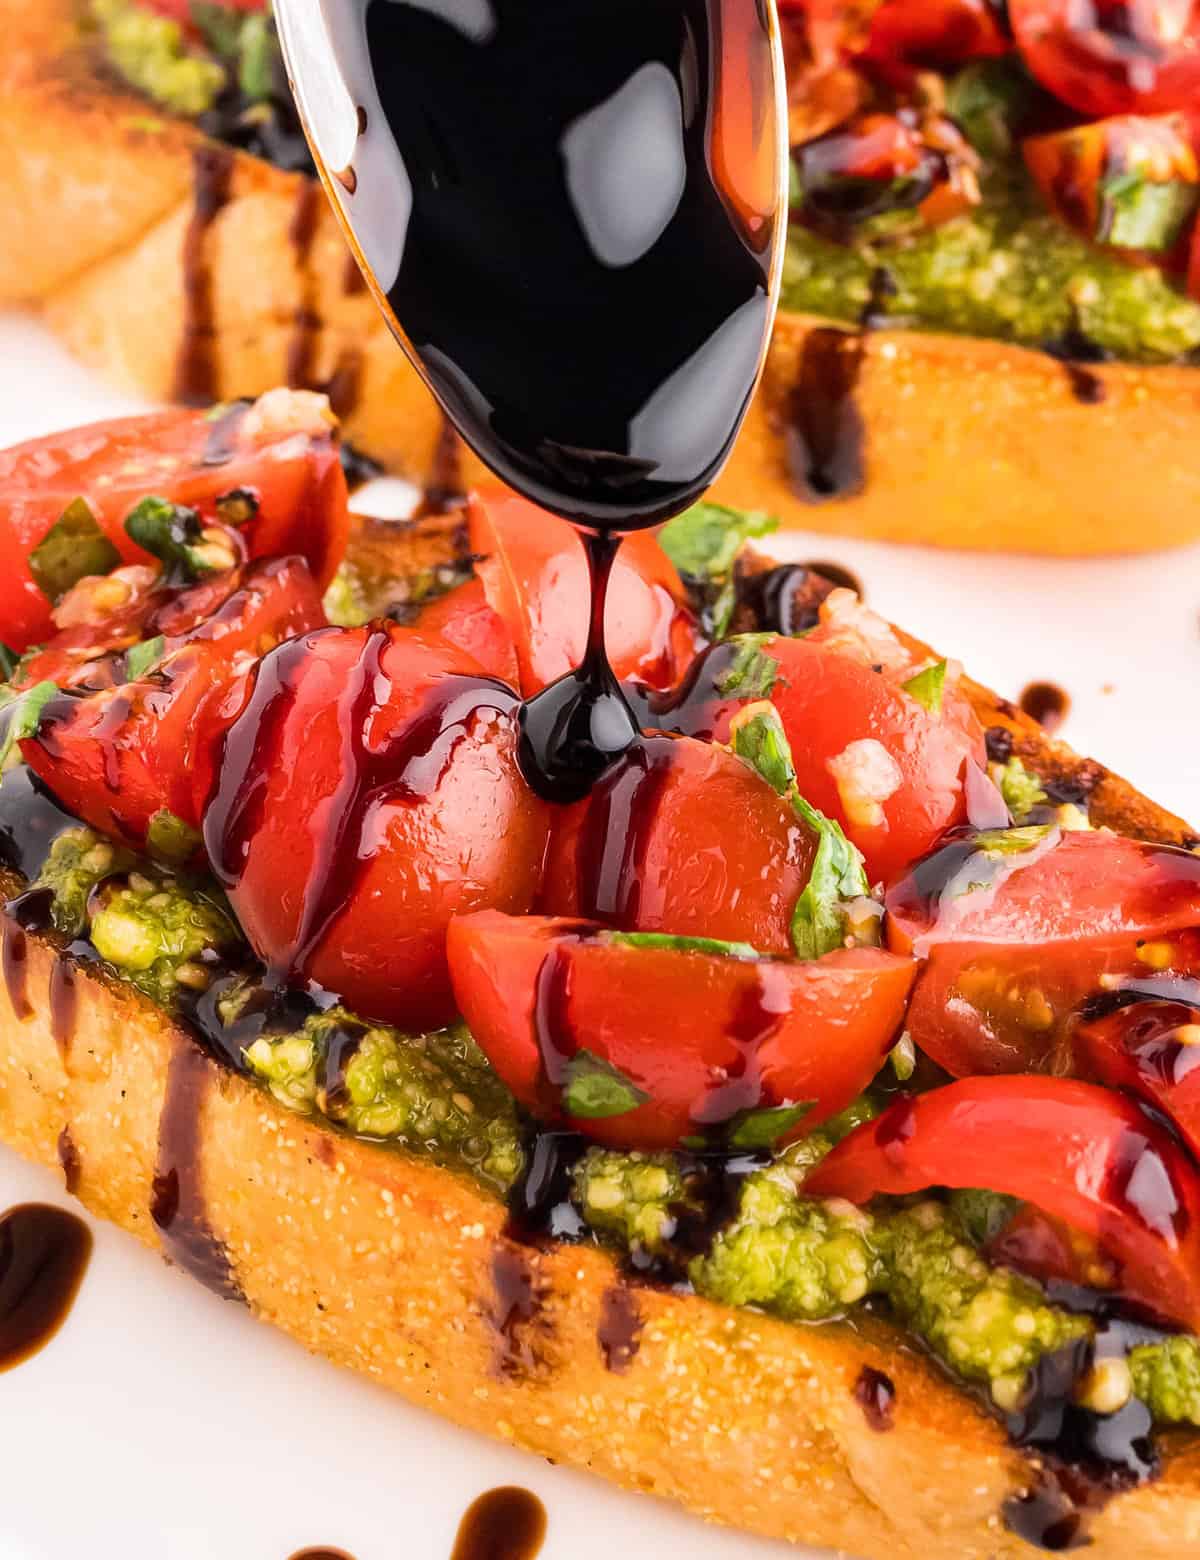 Crisp golden brown baguette slices are topped with a flavorful basil pesto, then a simple tomato bruschetta topping and drizzled with a sweet and tangy balsamic glaze. This is the ultimate summer appetizer, and sure to be a true crowd-pleaser!